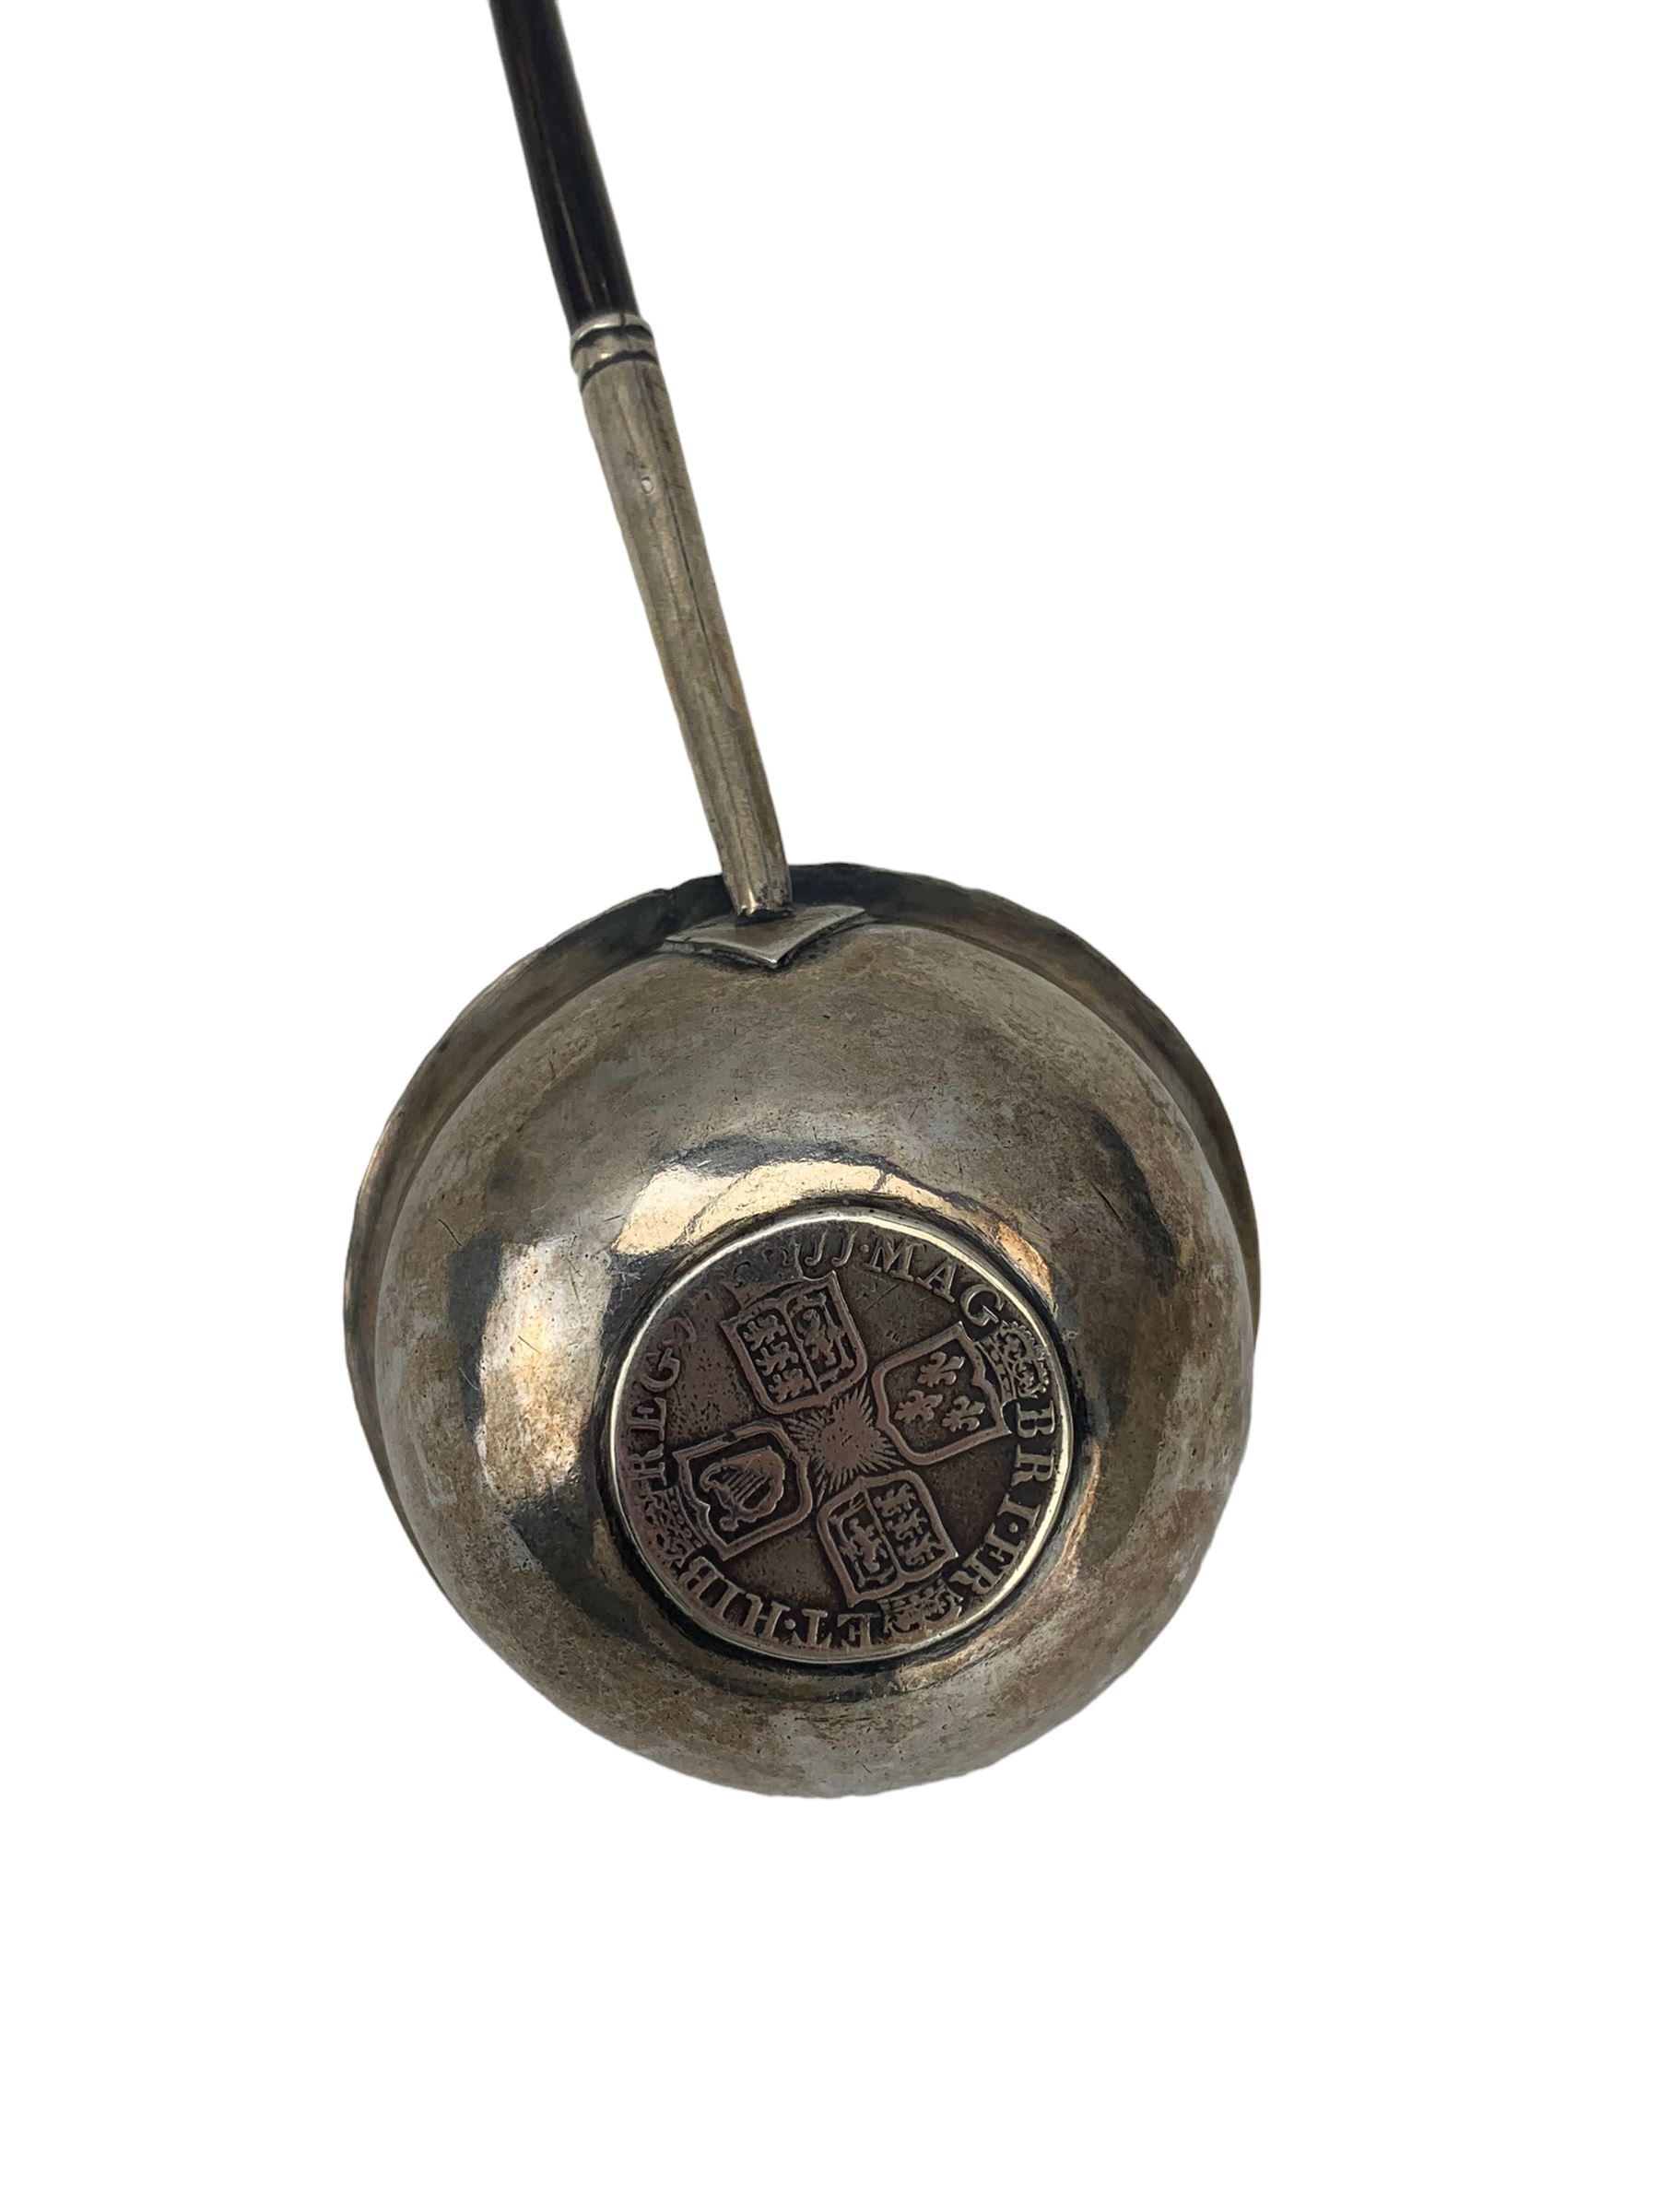 19th century toddy ladle - Image 3 of 3